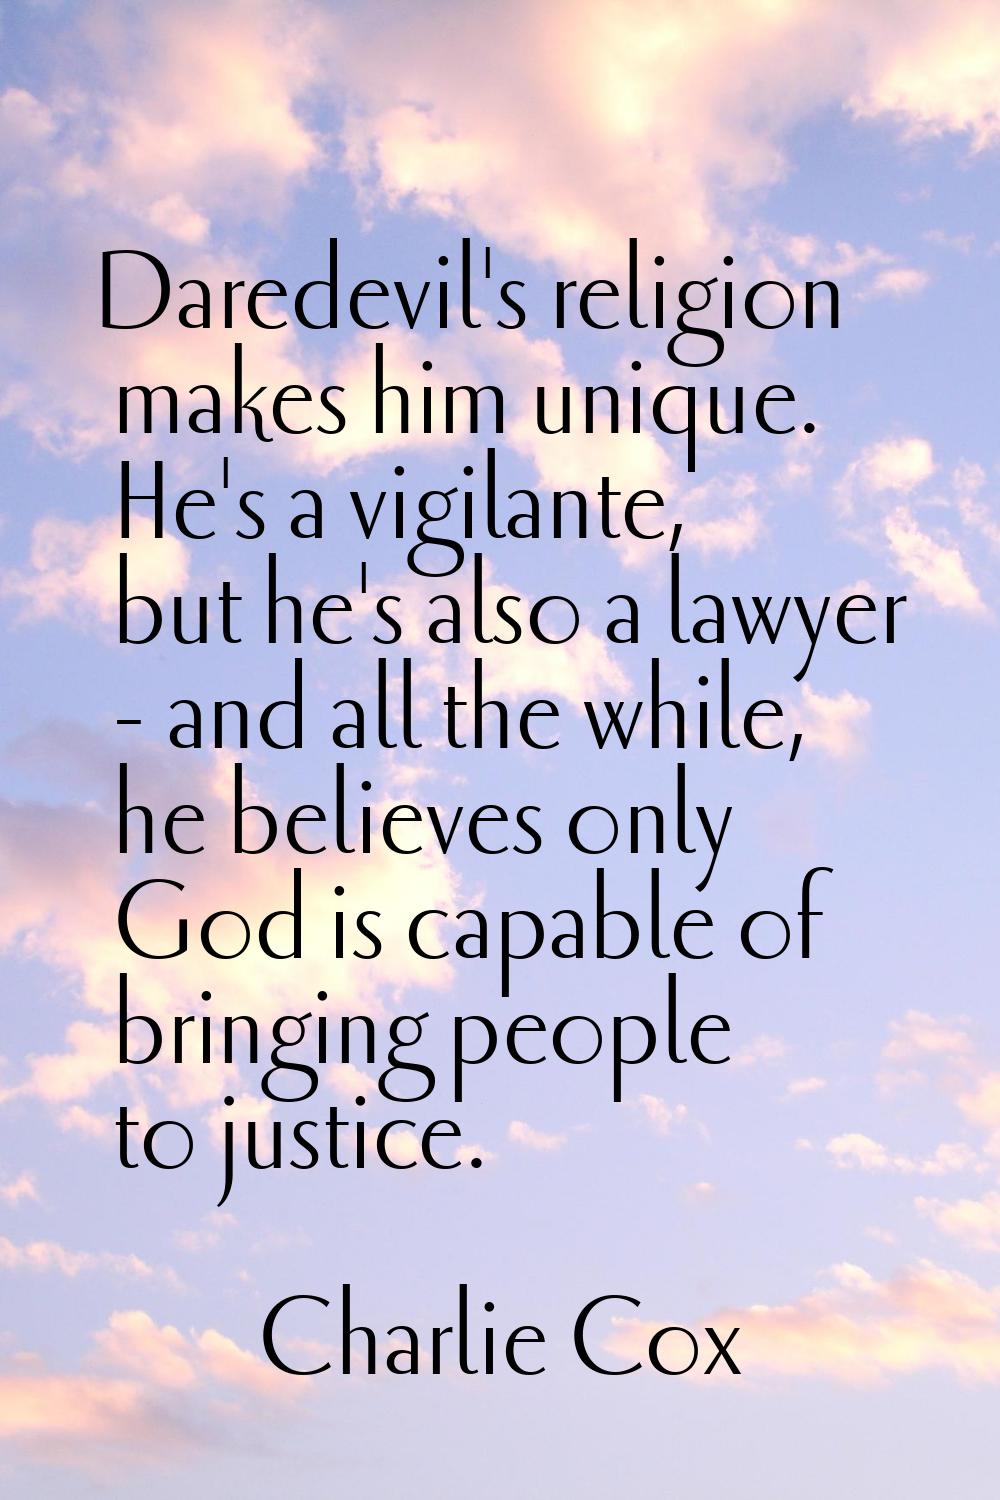 Daredevil's religion makes him unique. He's a vigilante, but he's also a lawyer - and all the while